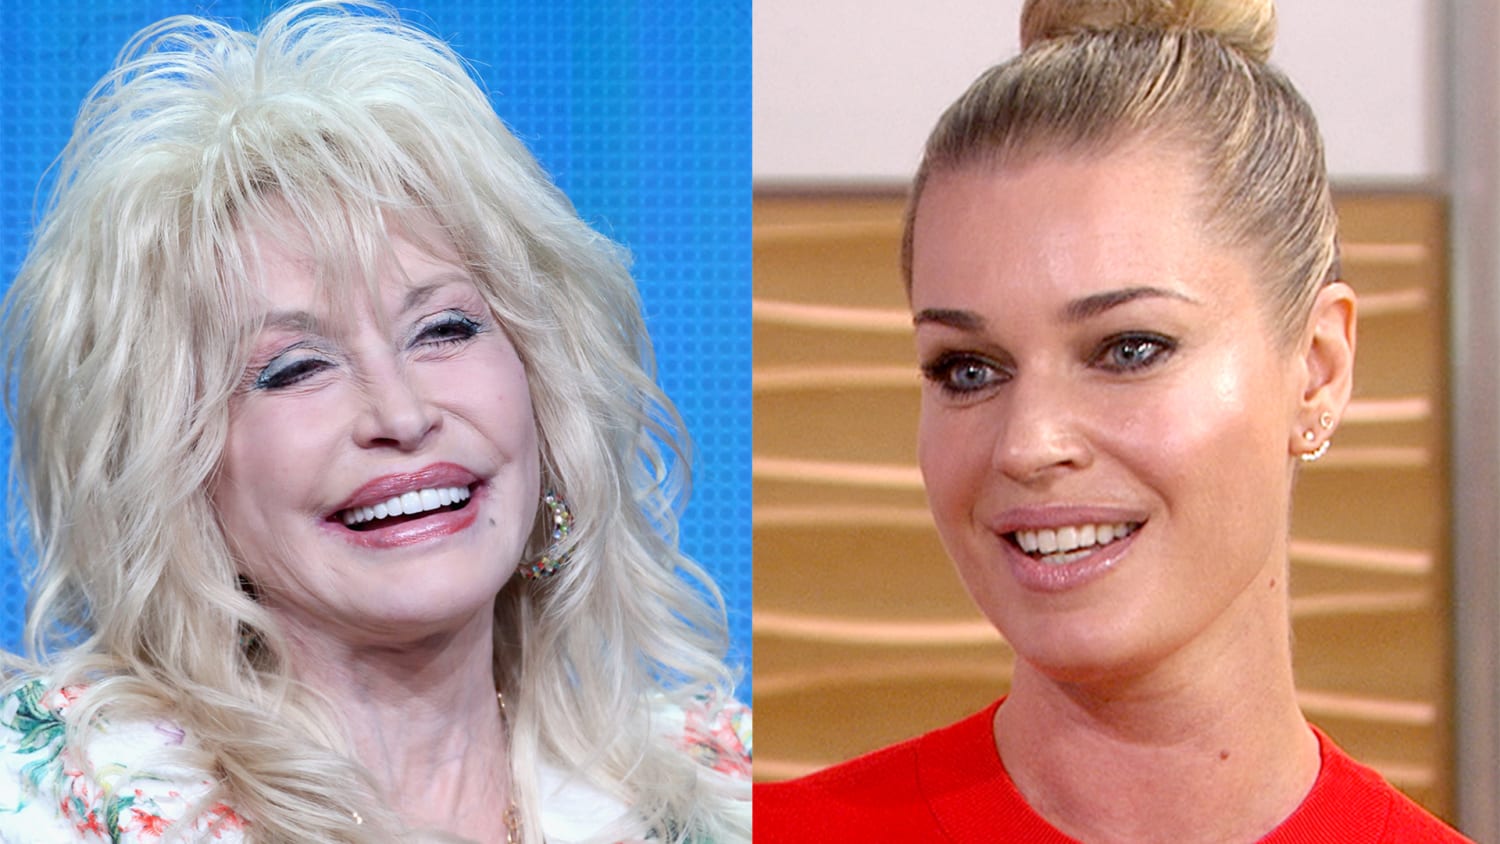 Rebecca Romijn named daughter after Dolly Parton, and singer had sweet response ...